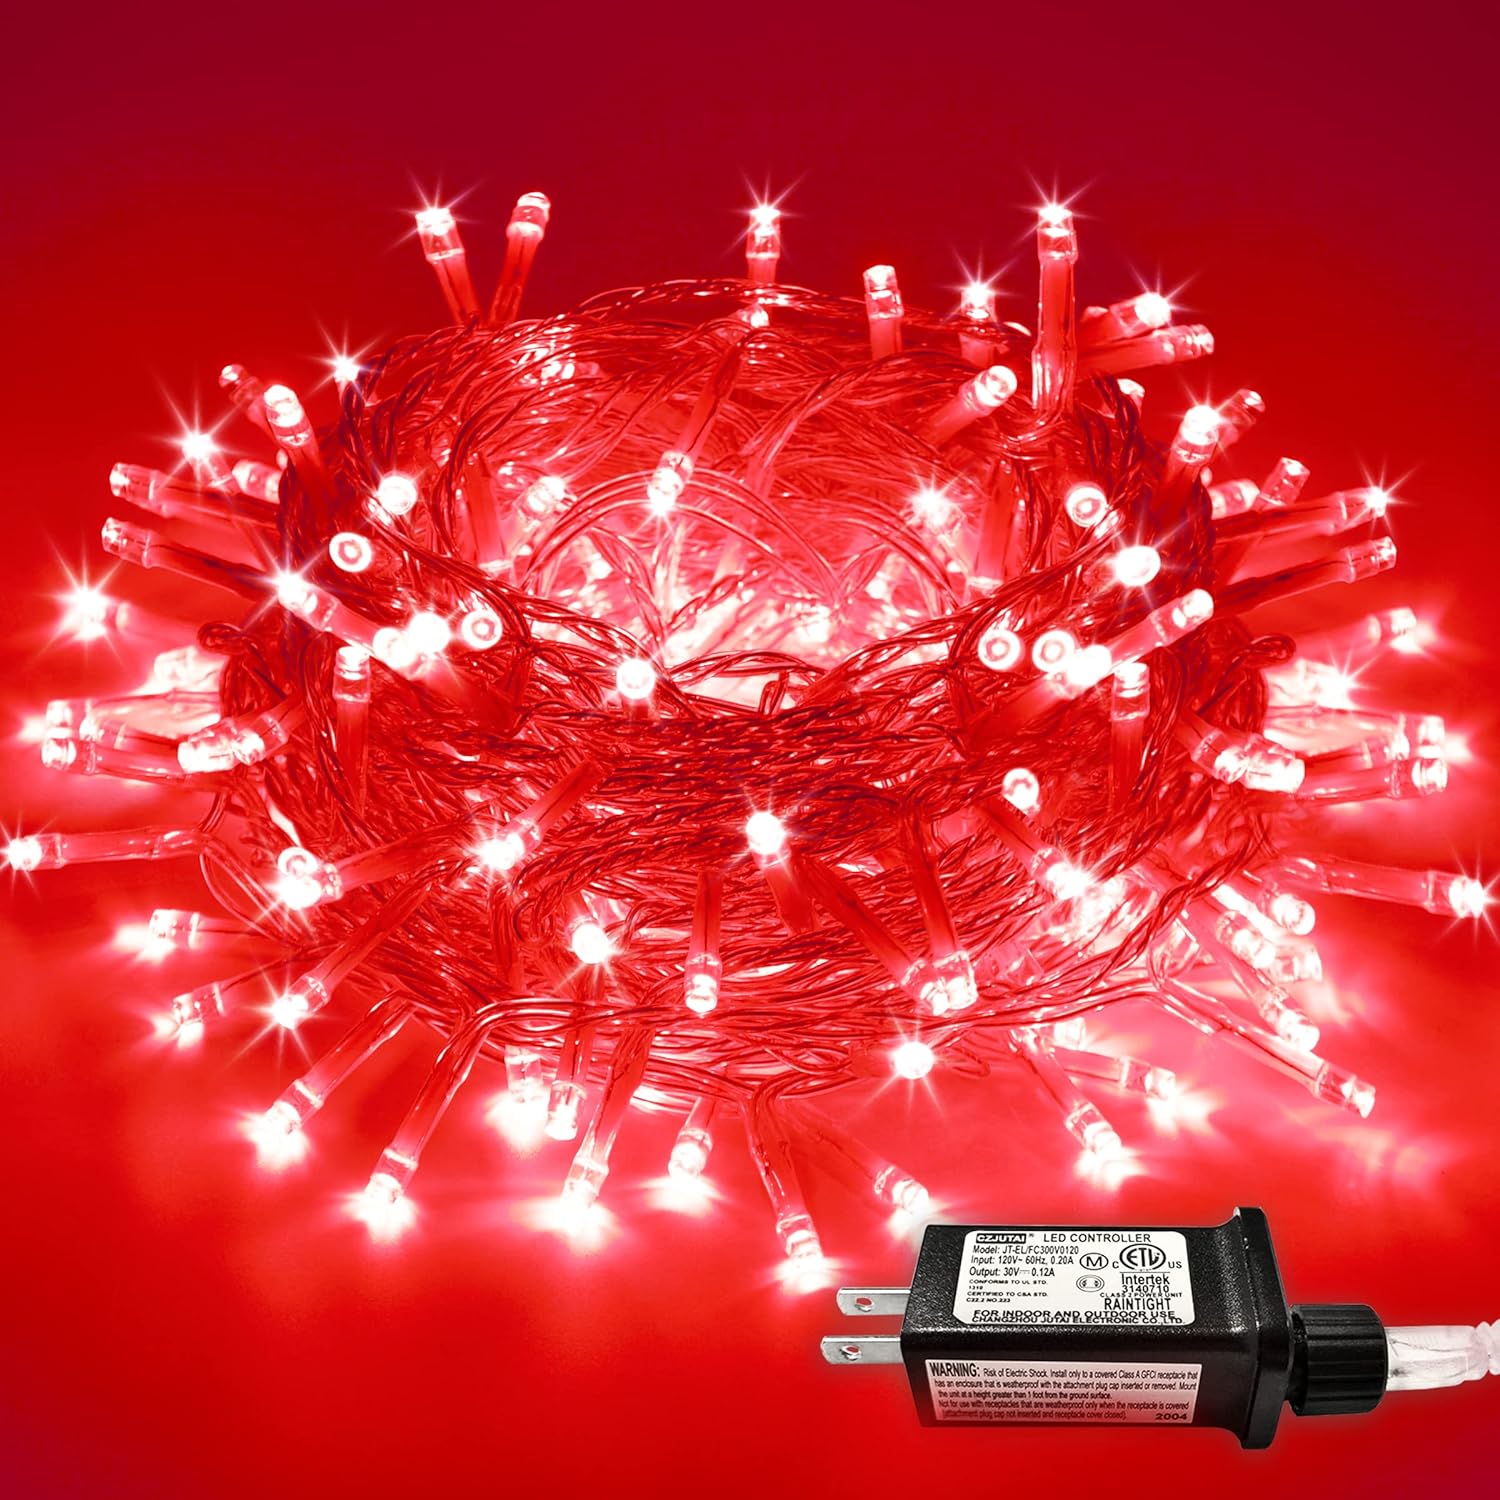 JMEXSUSS 200 LED Valentines Day Decor String Lights, 66FT Red Christmas String Lights Clear Wire, 8 Modes Valentine Tree Lights Outdoor Waterproof Plug in for Tree Room Wedding Party Decorations